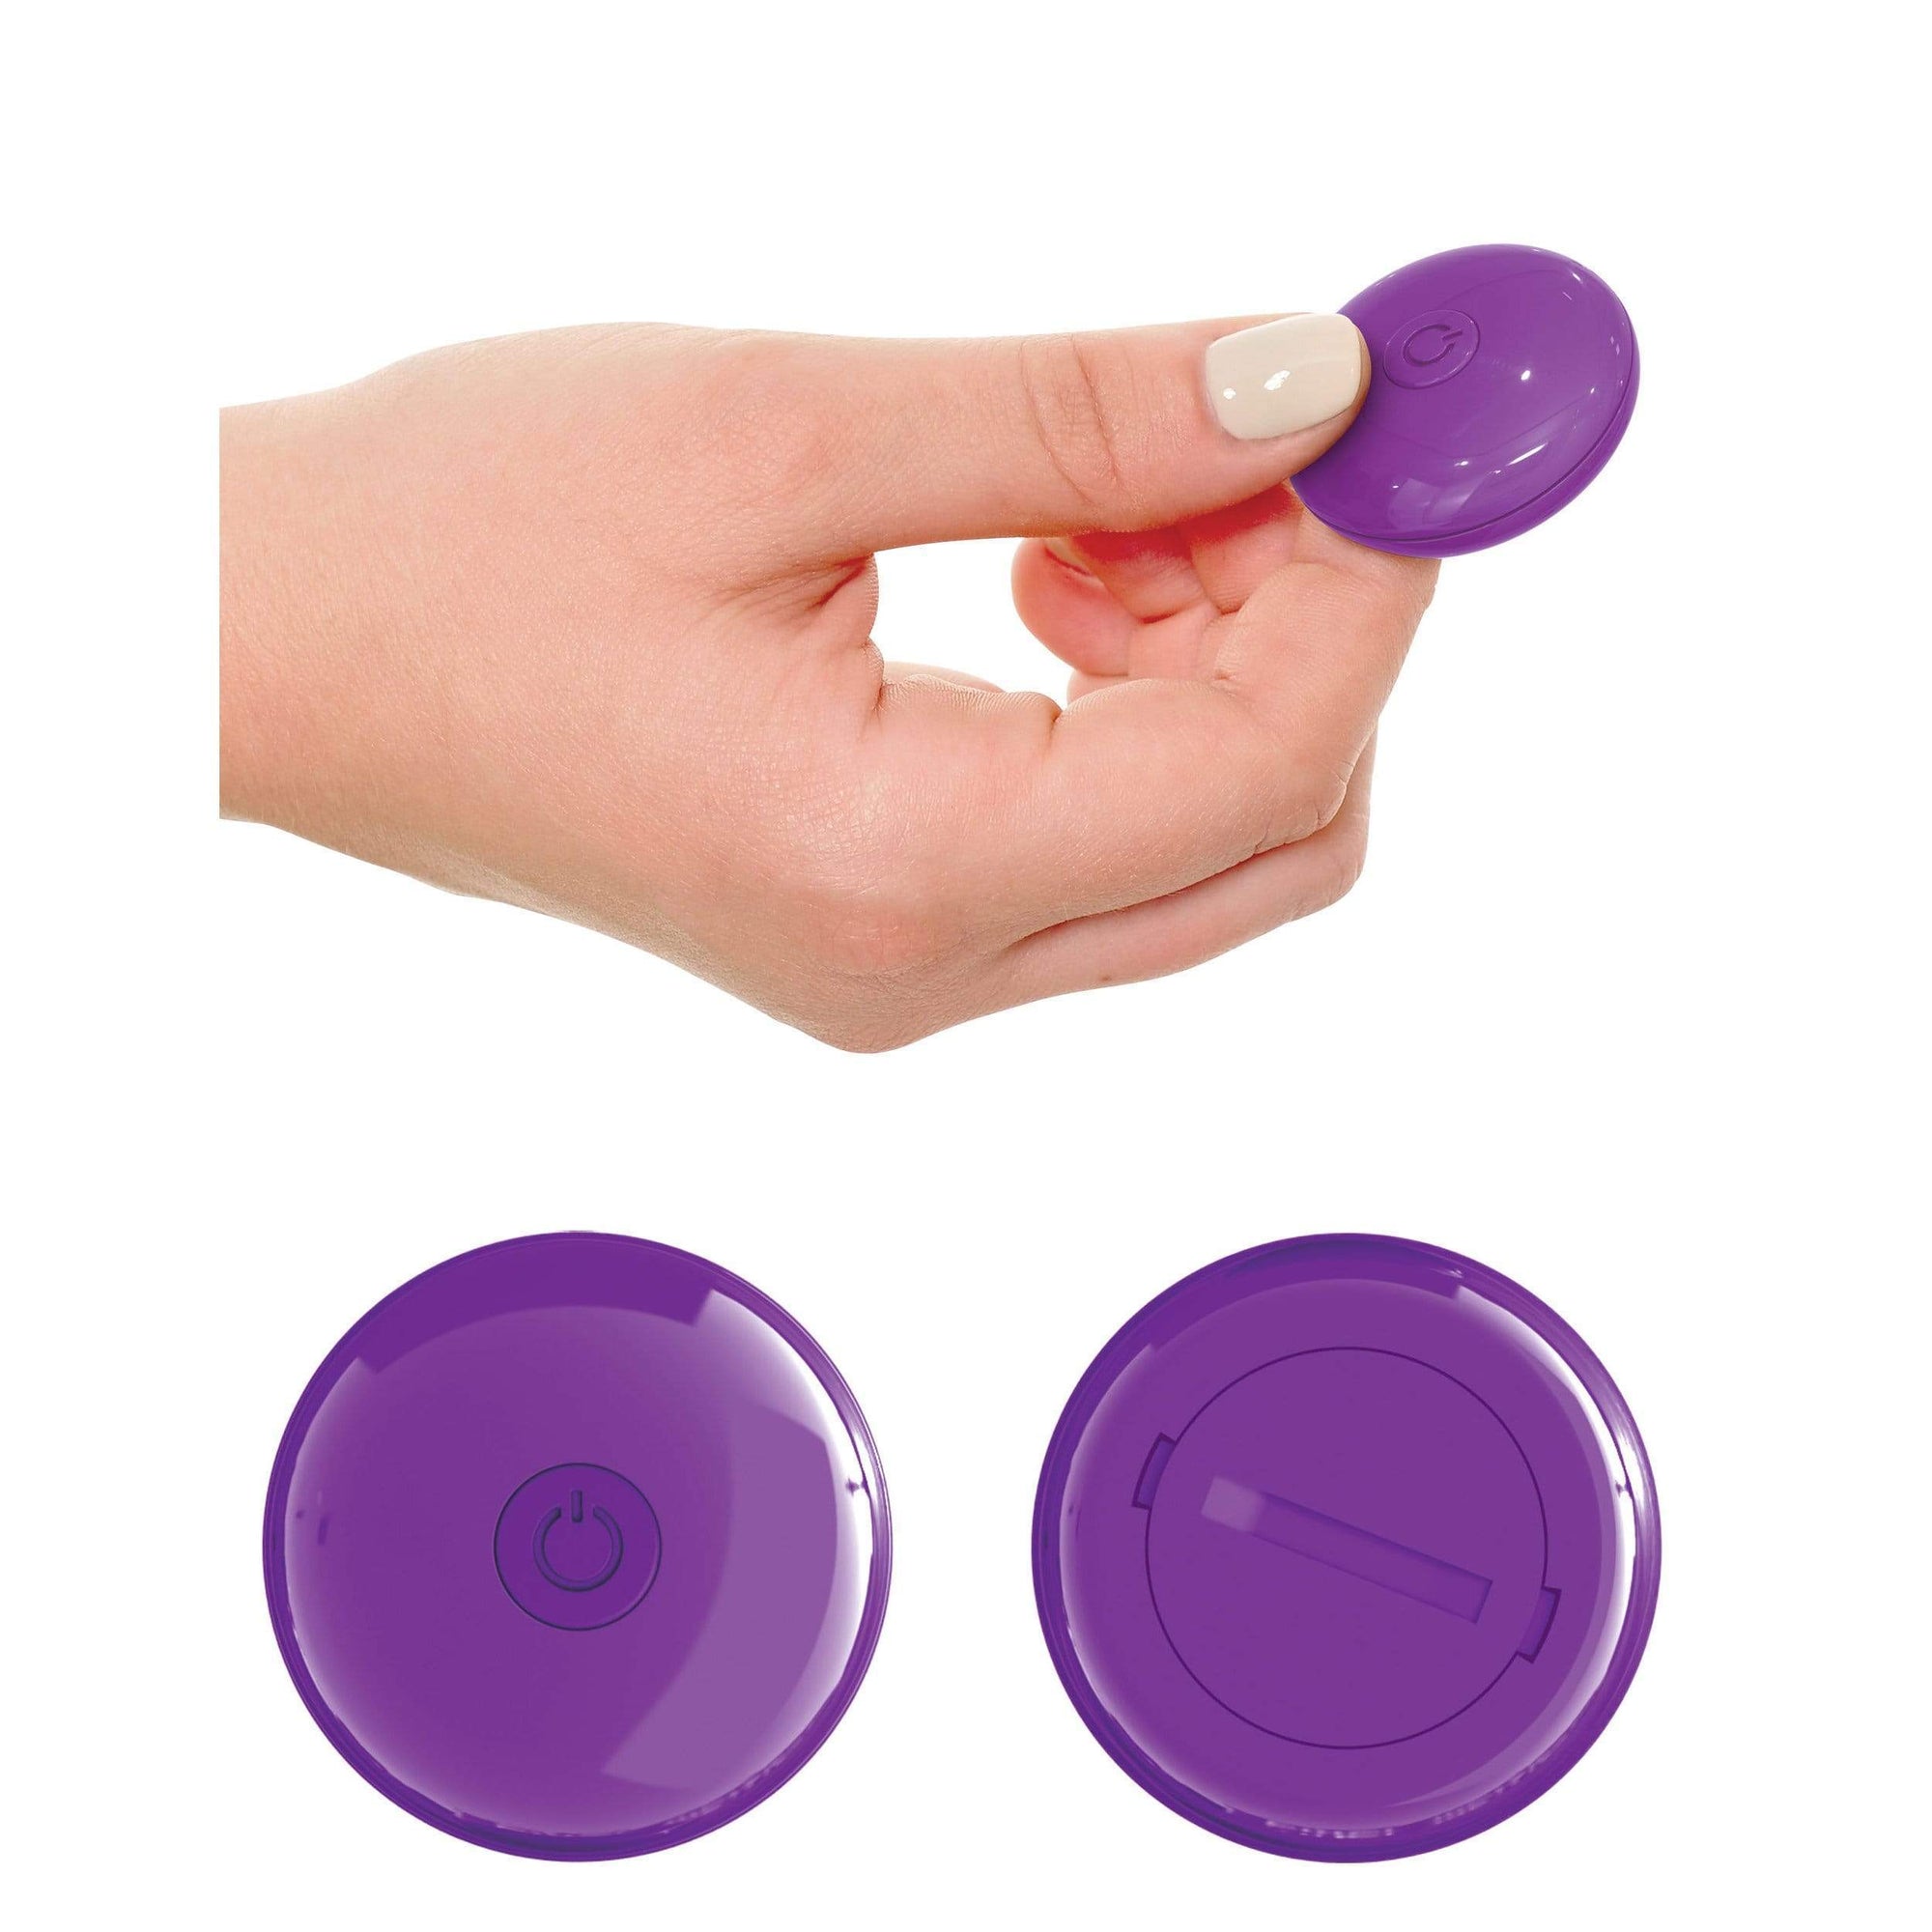 Pipedream - 3Some Myself and Us Rock N Ride Silicone Vibrator (Purple) Couple's Massager (Vibration) Rechargeable 603912761788 CherryAffairs